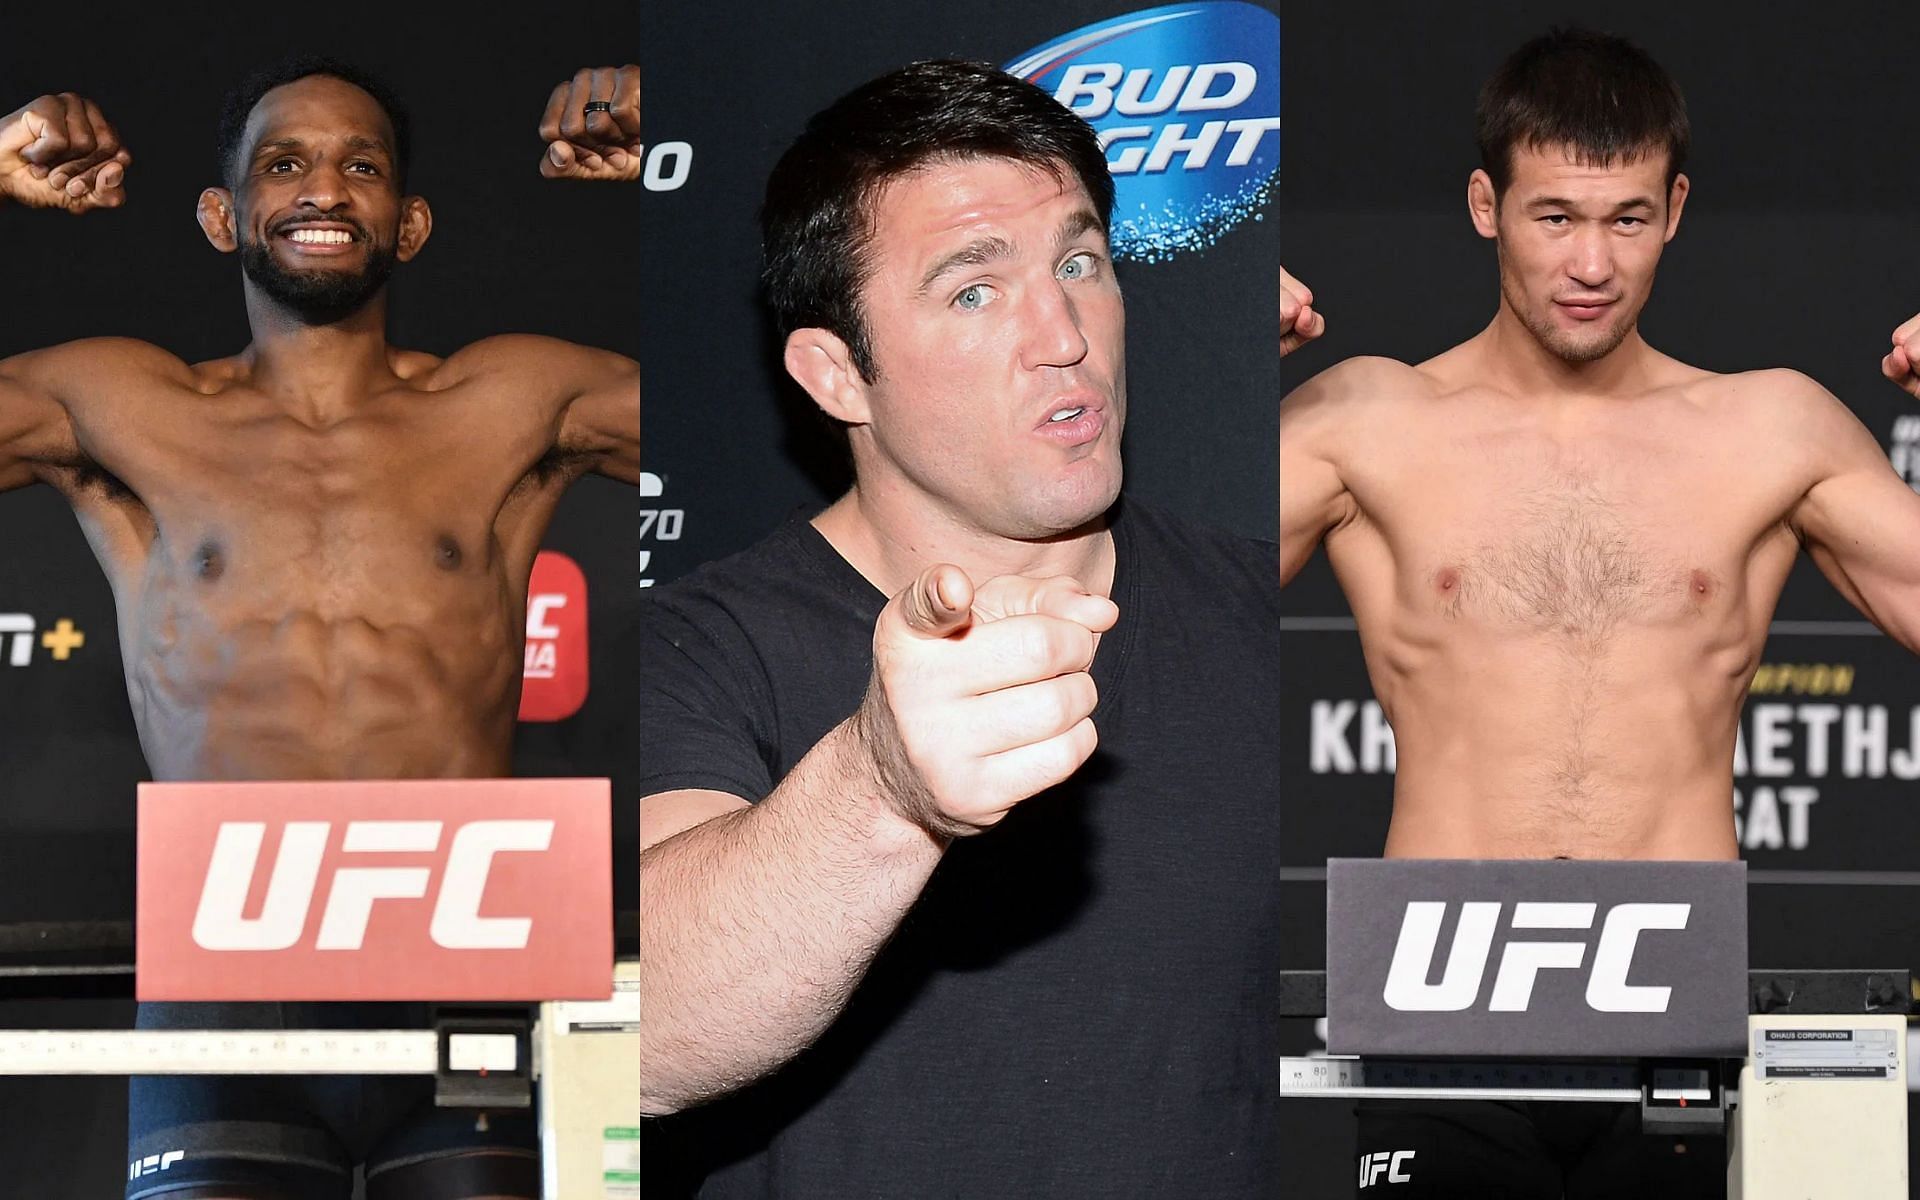 Neil Magny (Left), Chael Sonnen (Middle), and Shavkat Rakhmonov (Right) (Images courtesy of Getty)